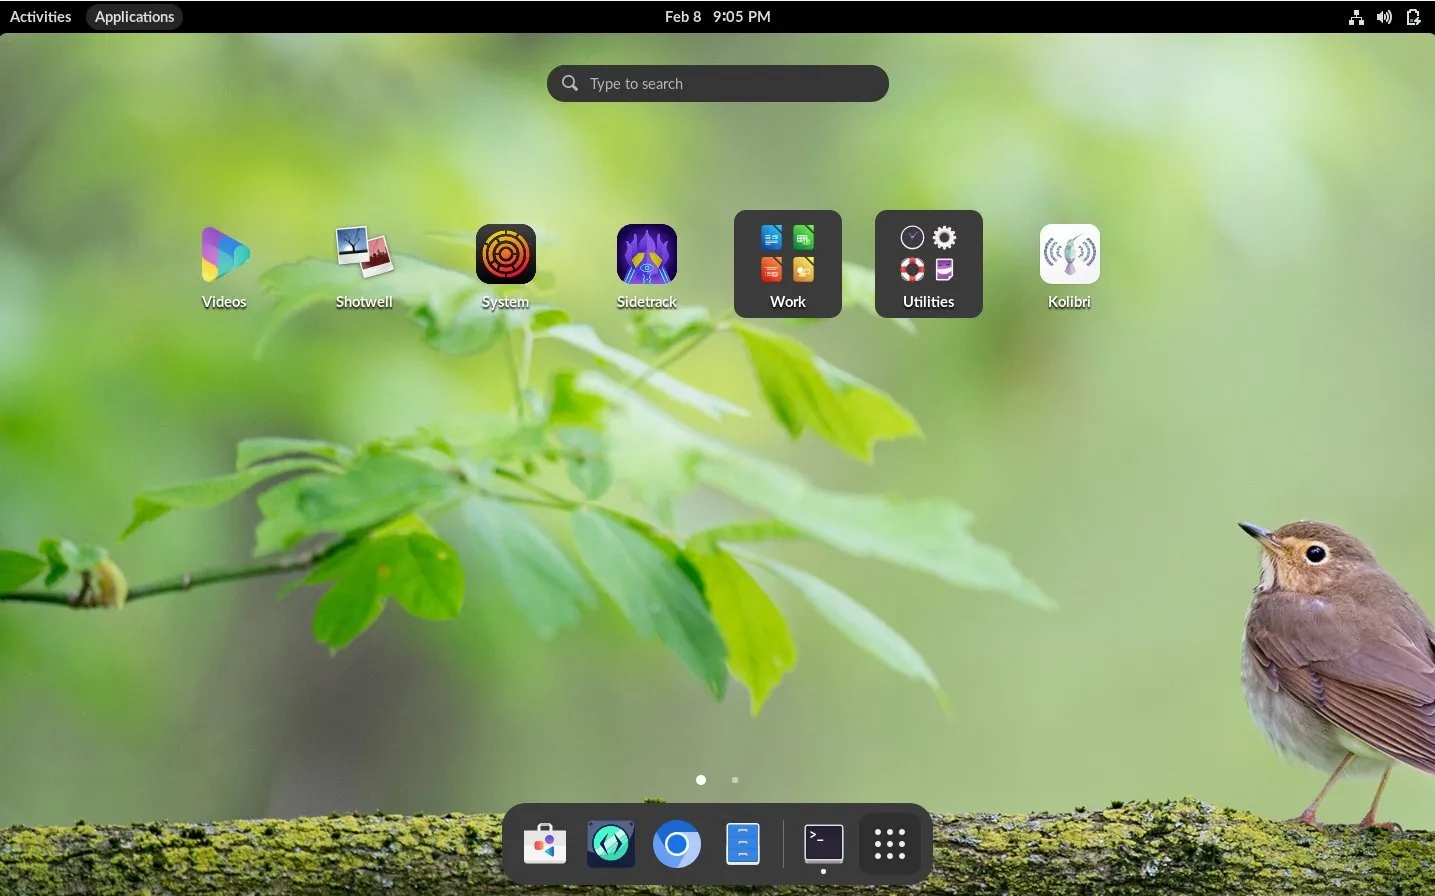 Look has changed since prior release with dock and top panel in Endless OS 5.0